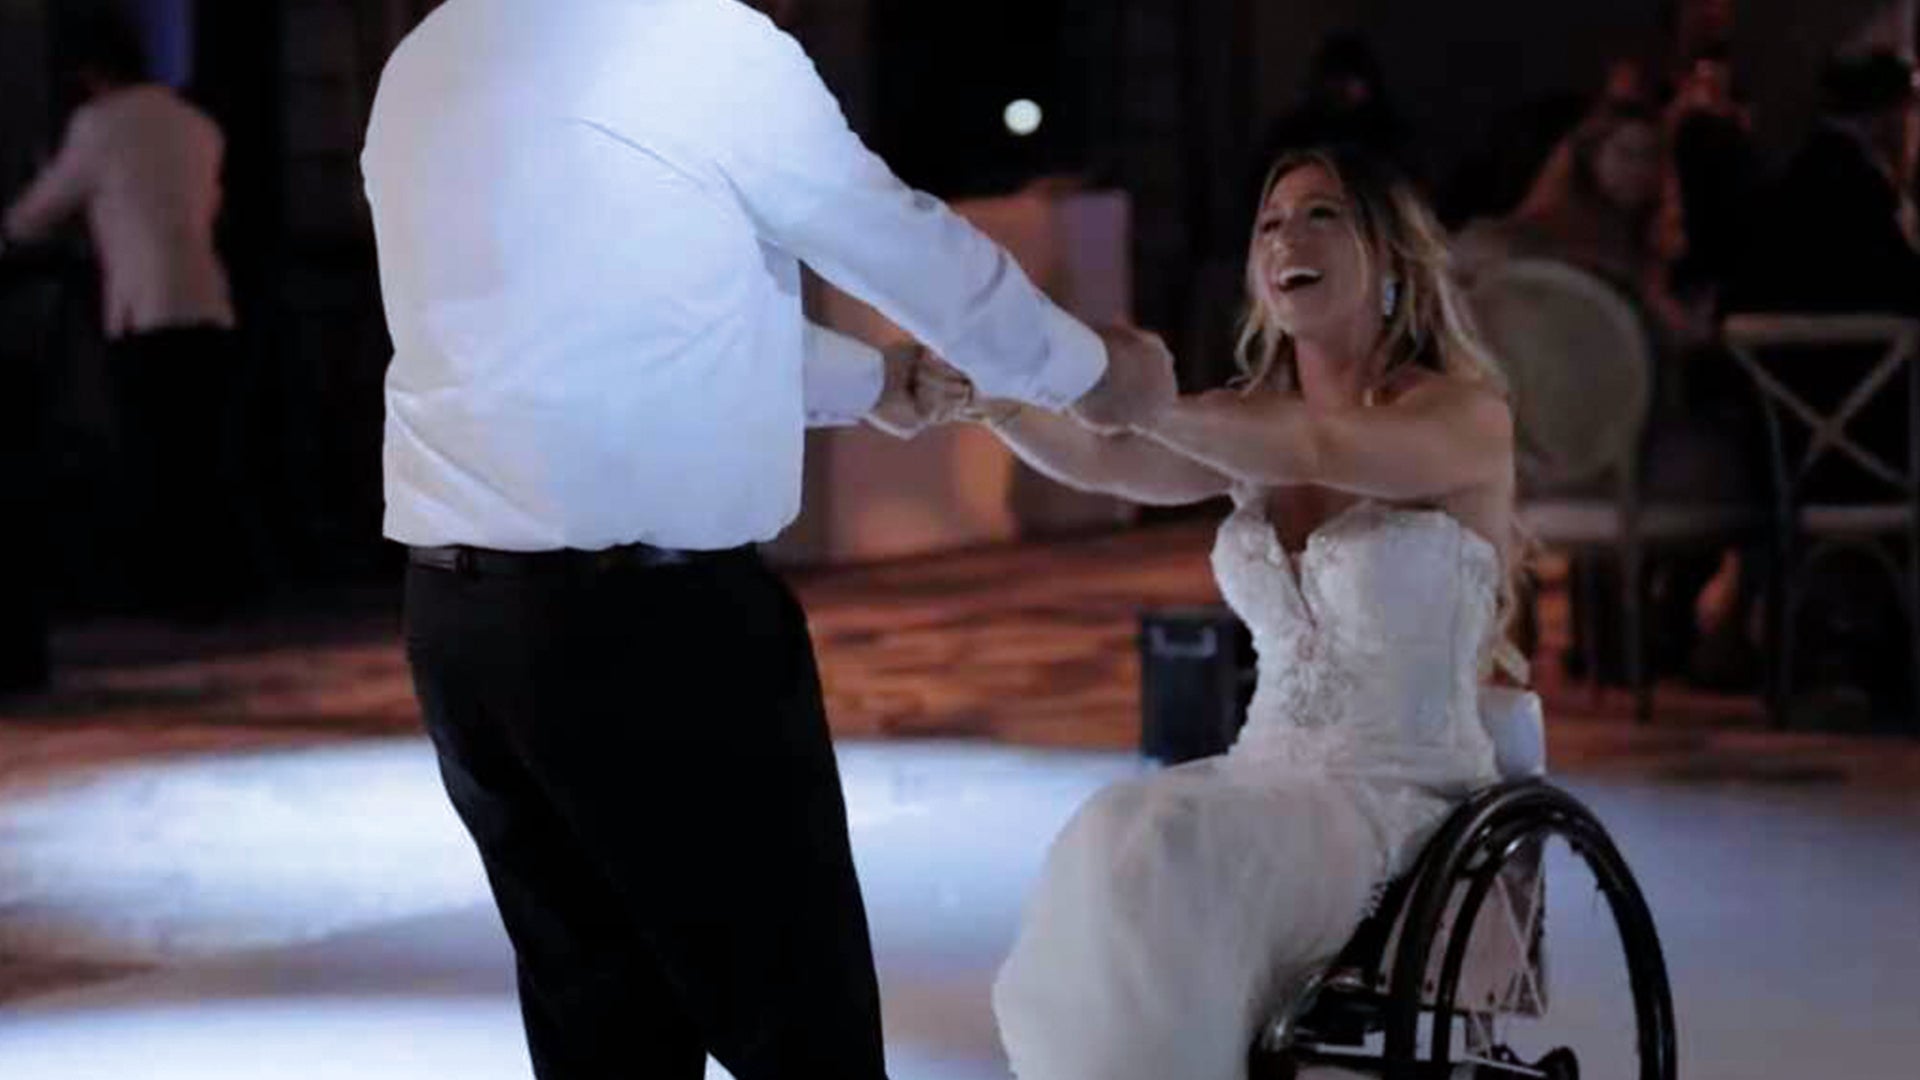 Love Looks Like This: My Husband Was Paralyzed on Our 3rd Date